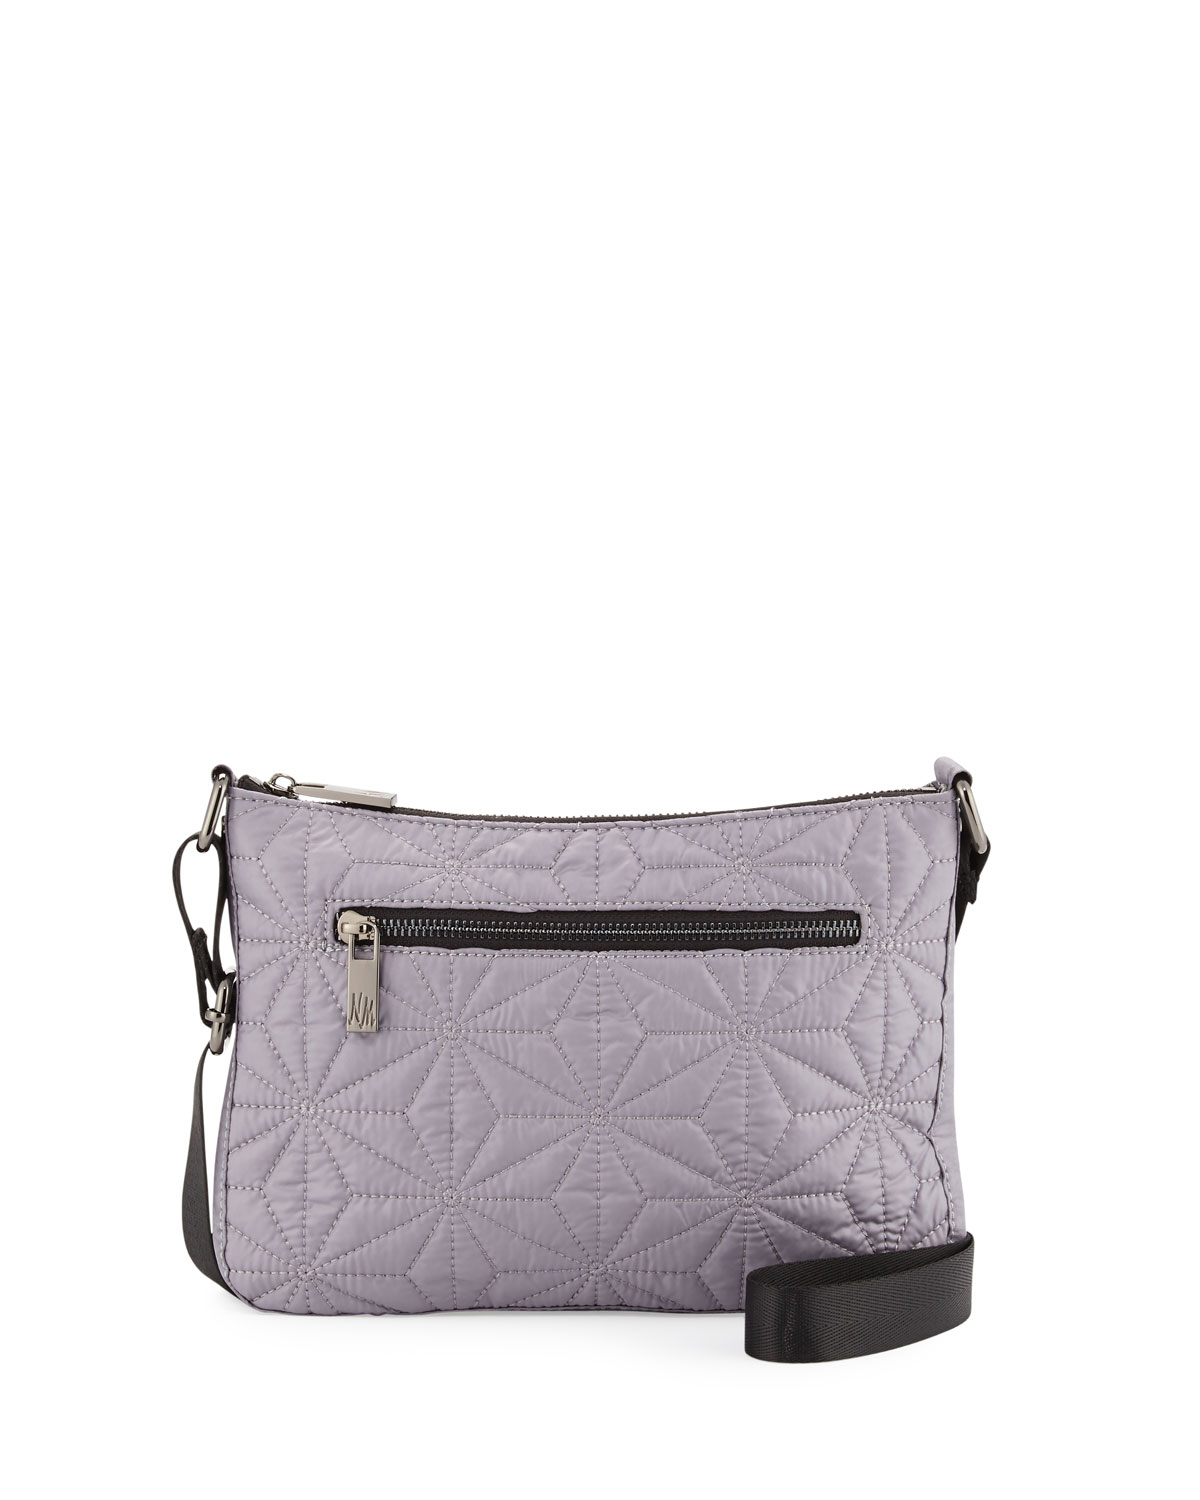 Lyst - Neiman Marcus Star-quilted Nylon Crossbody Bag in Gray